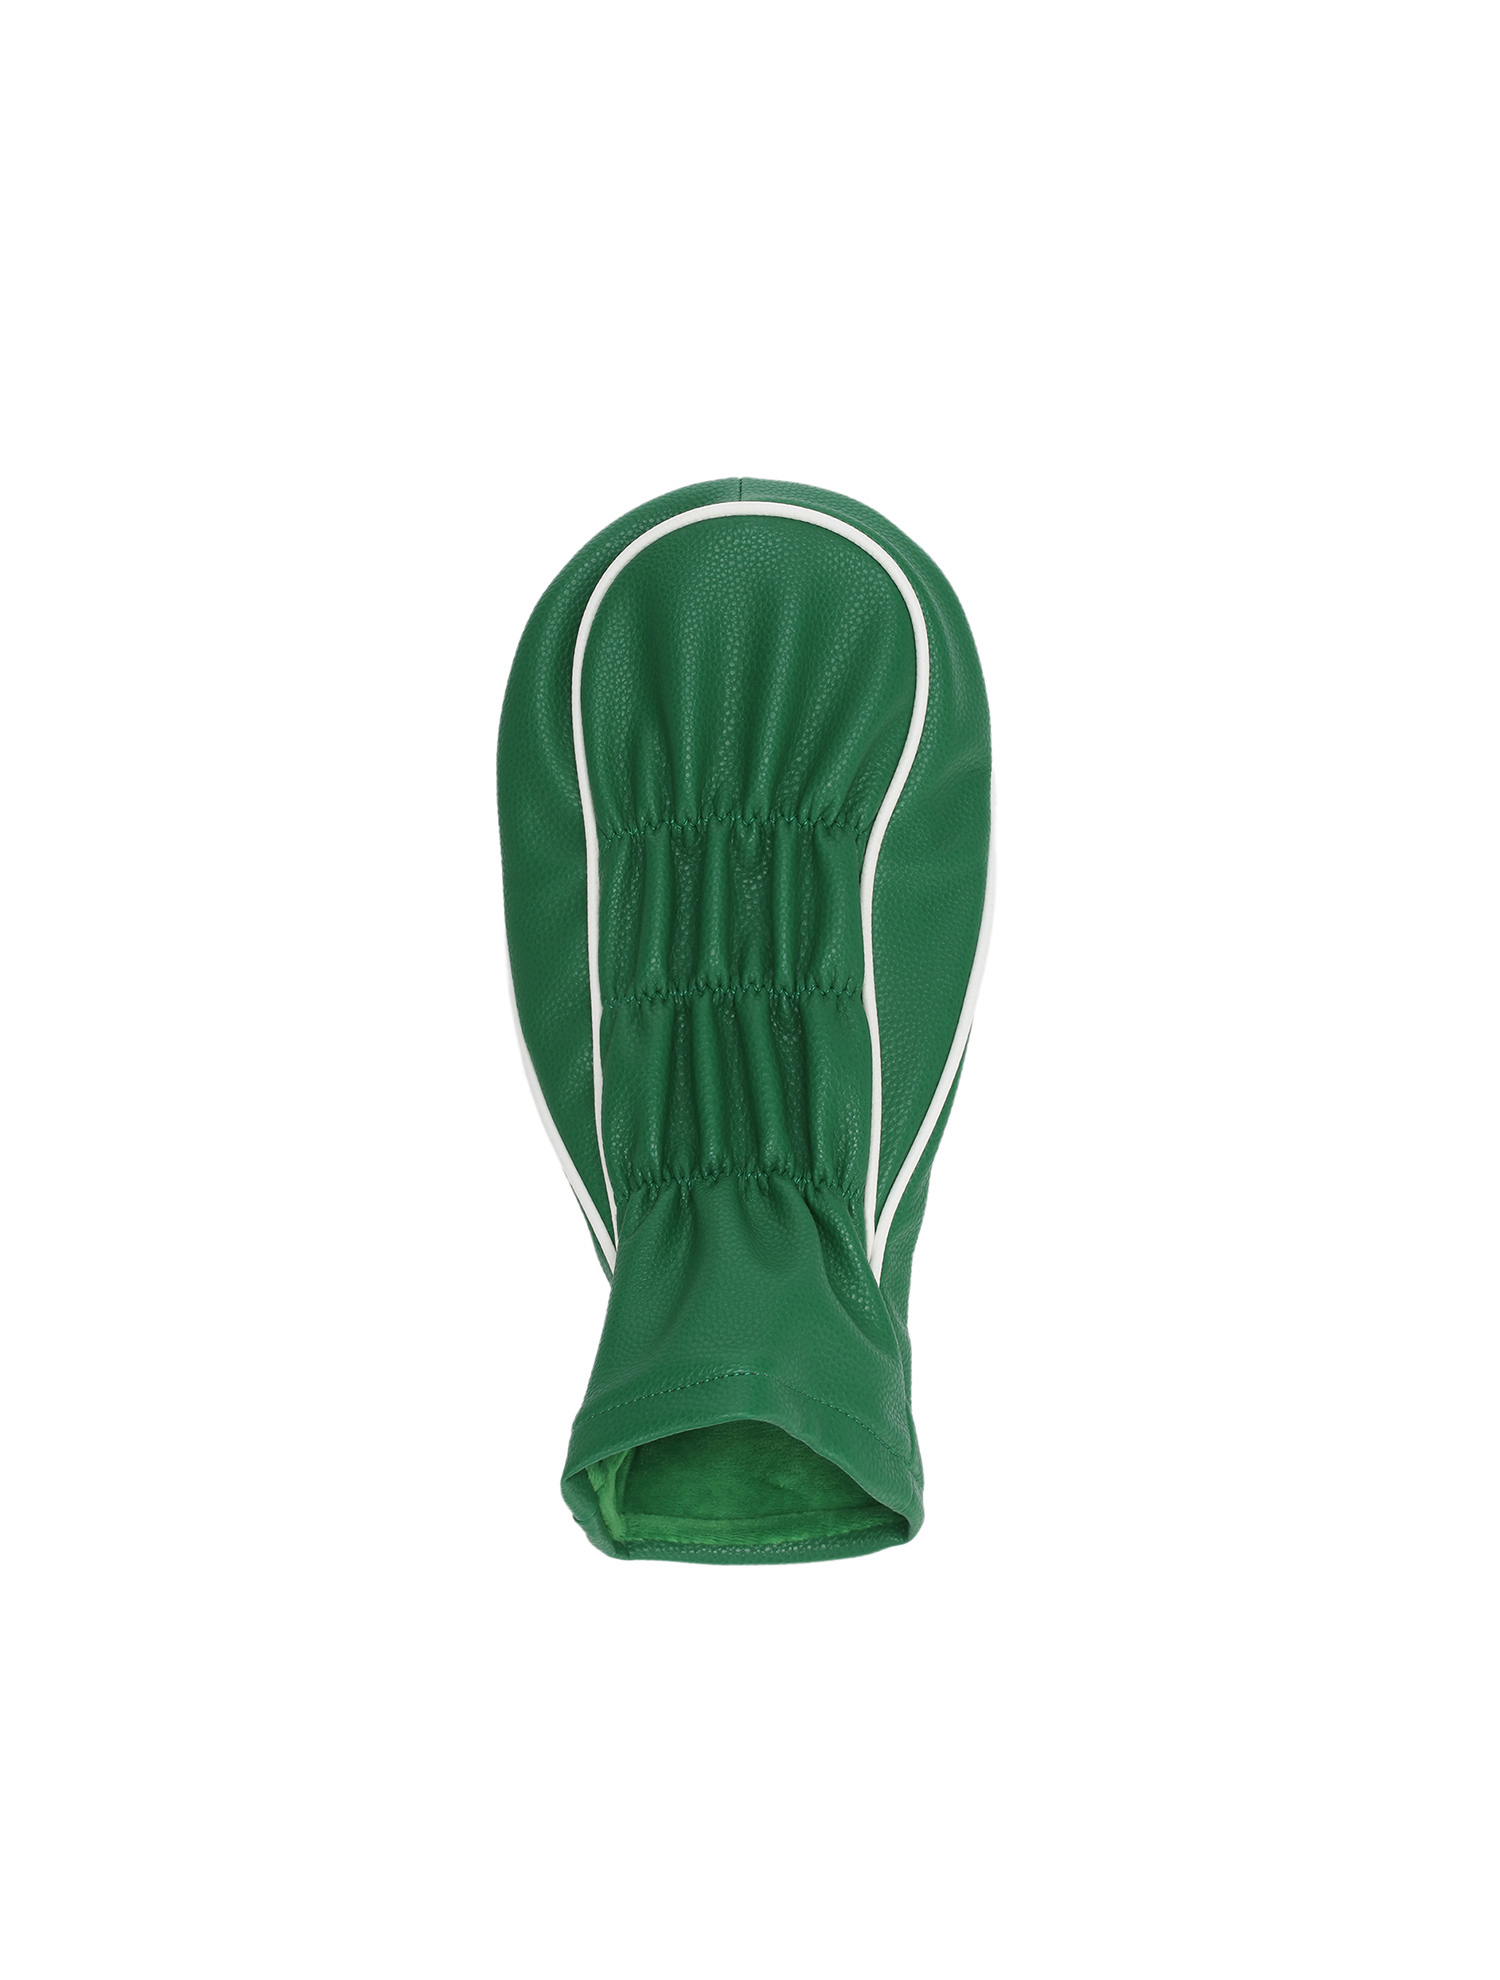 Martiny Driver Cover_Green (QWAEAA00122)